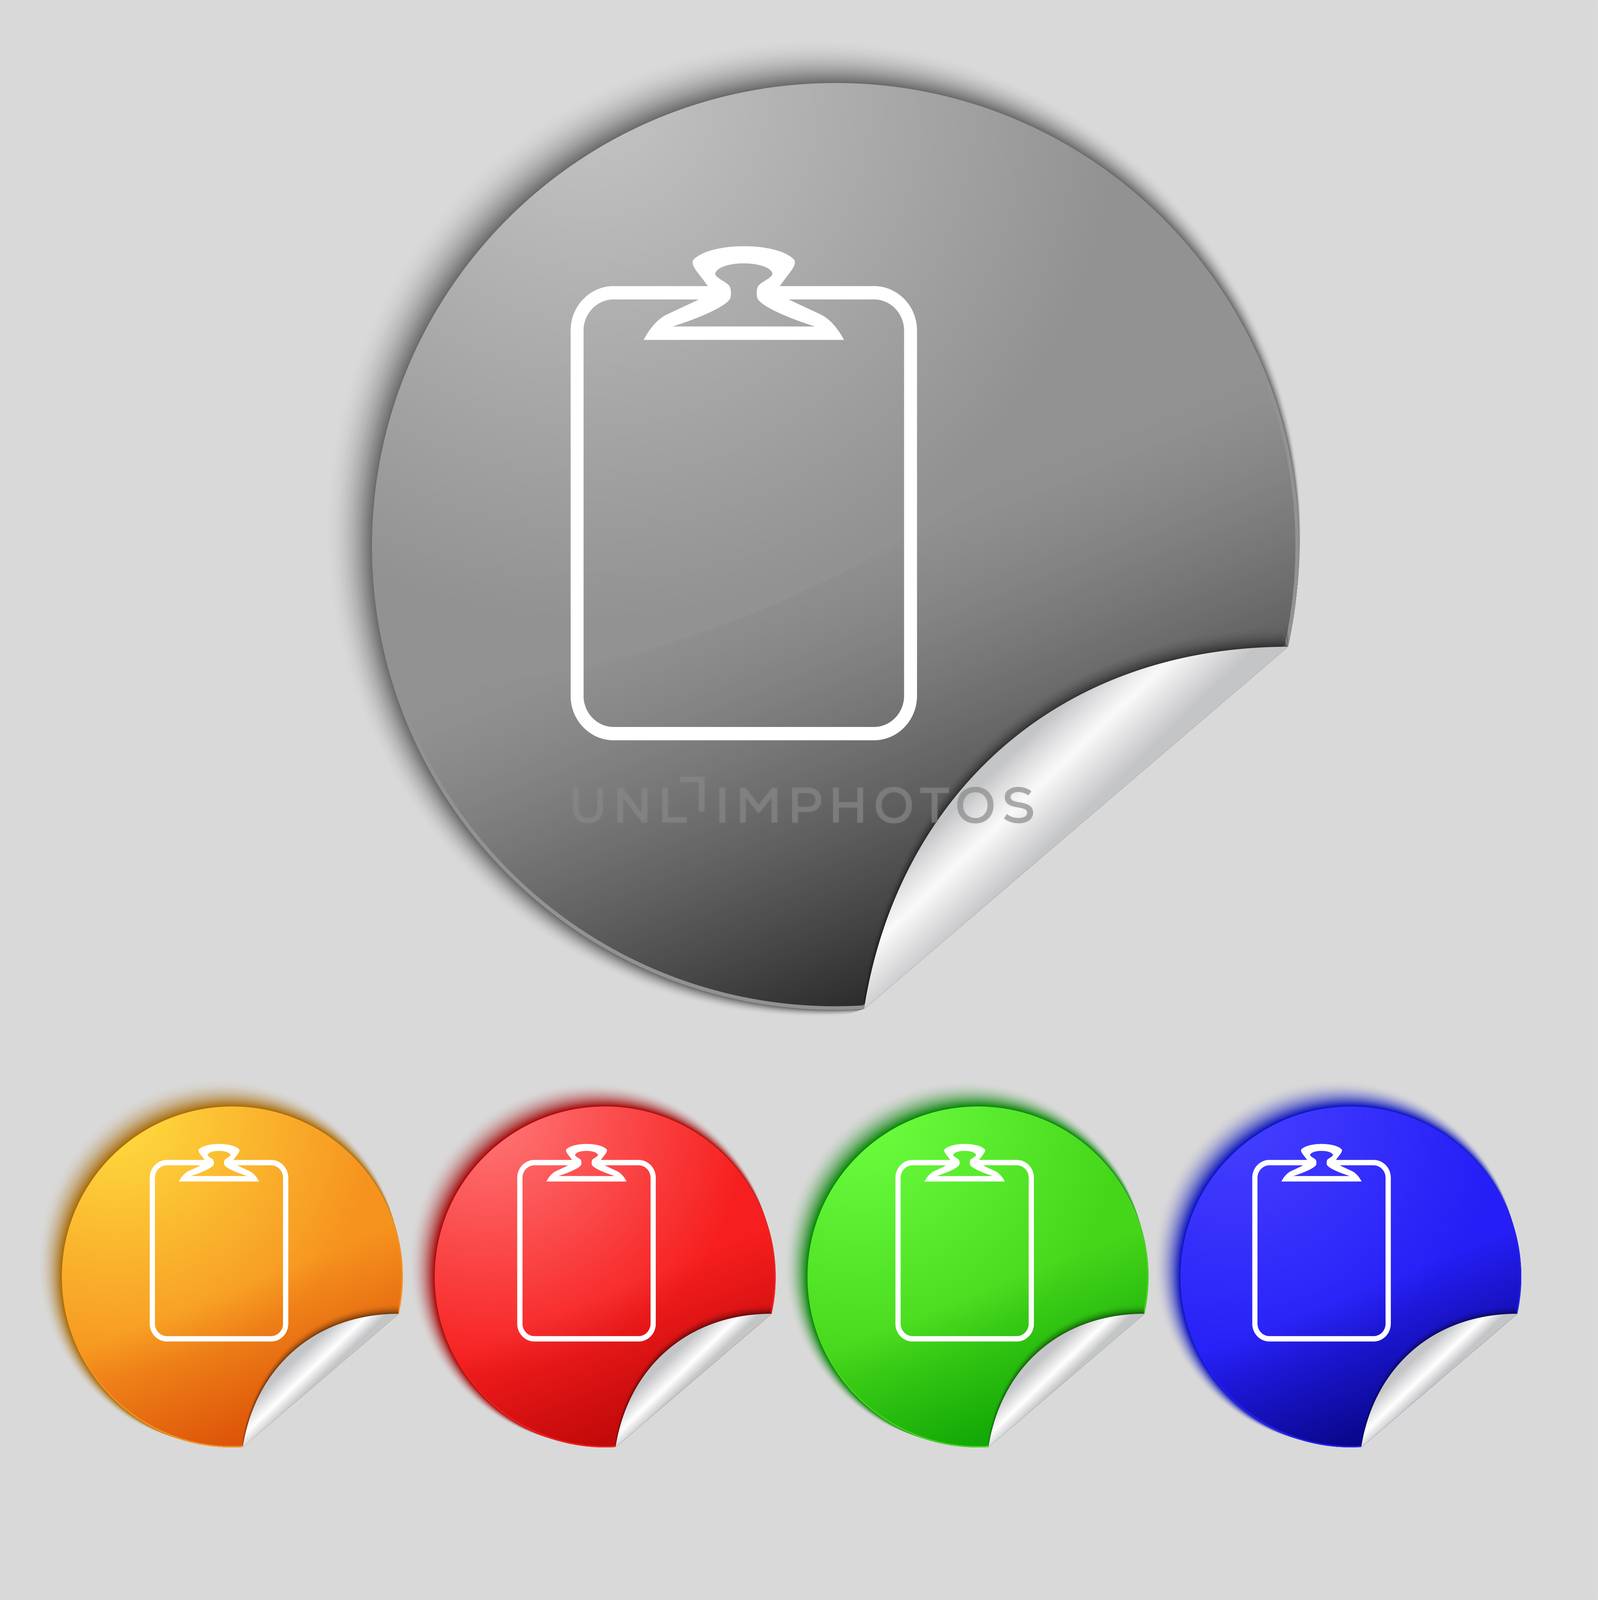 File annex icon. Paper clip symbol. Attach sign. Set of coloured buttons.  by serhii_lohvyniuk